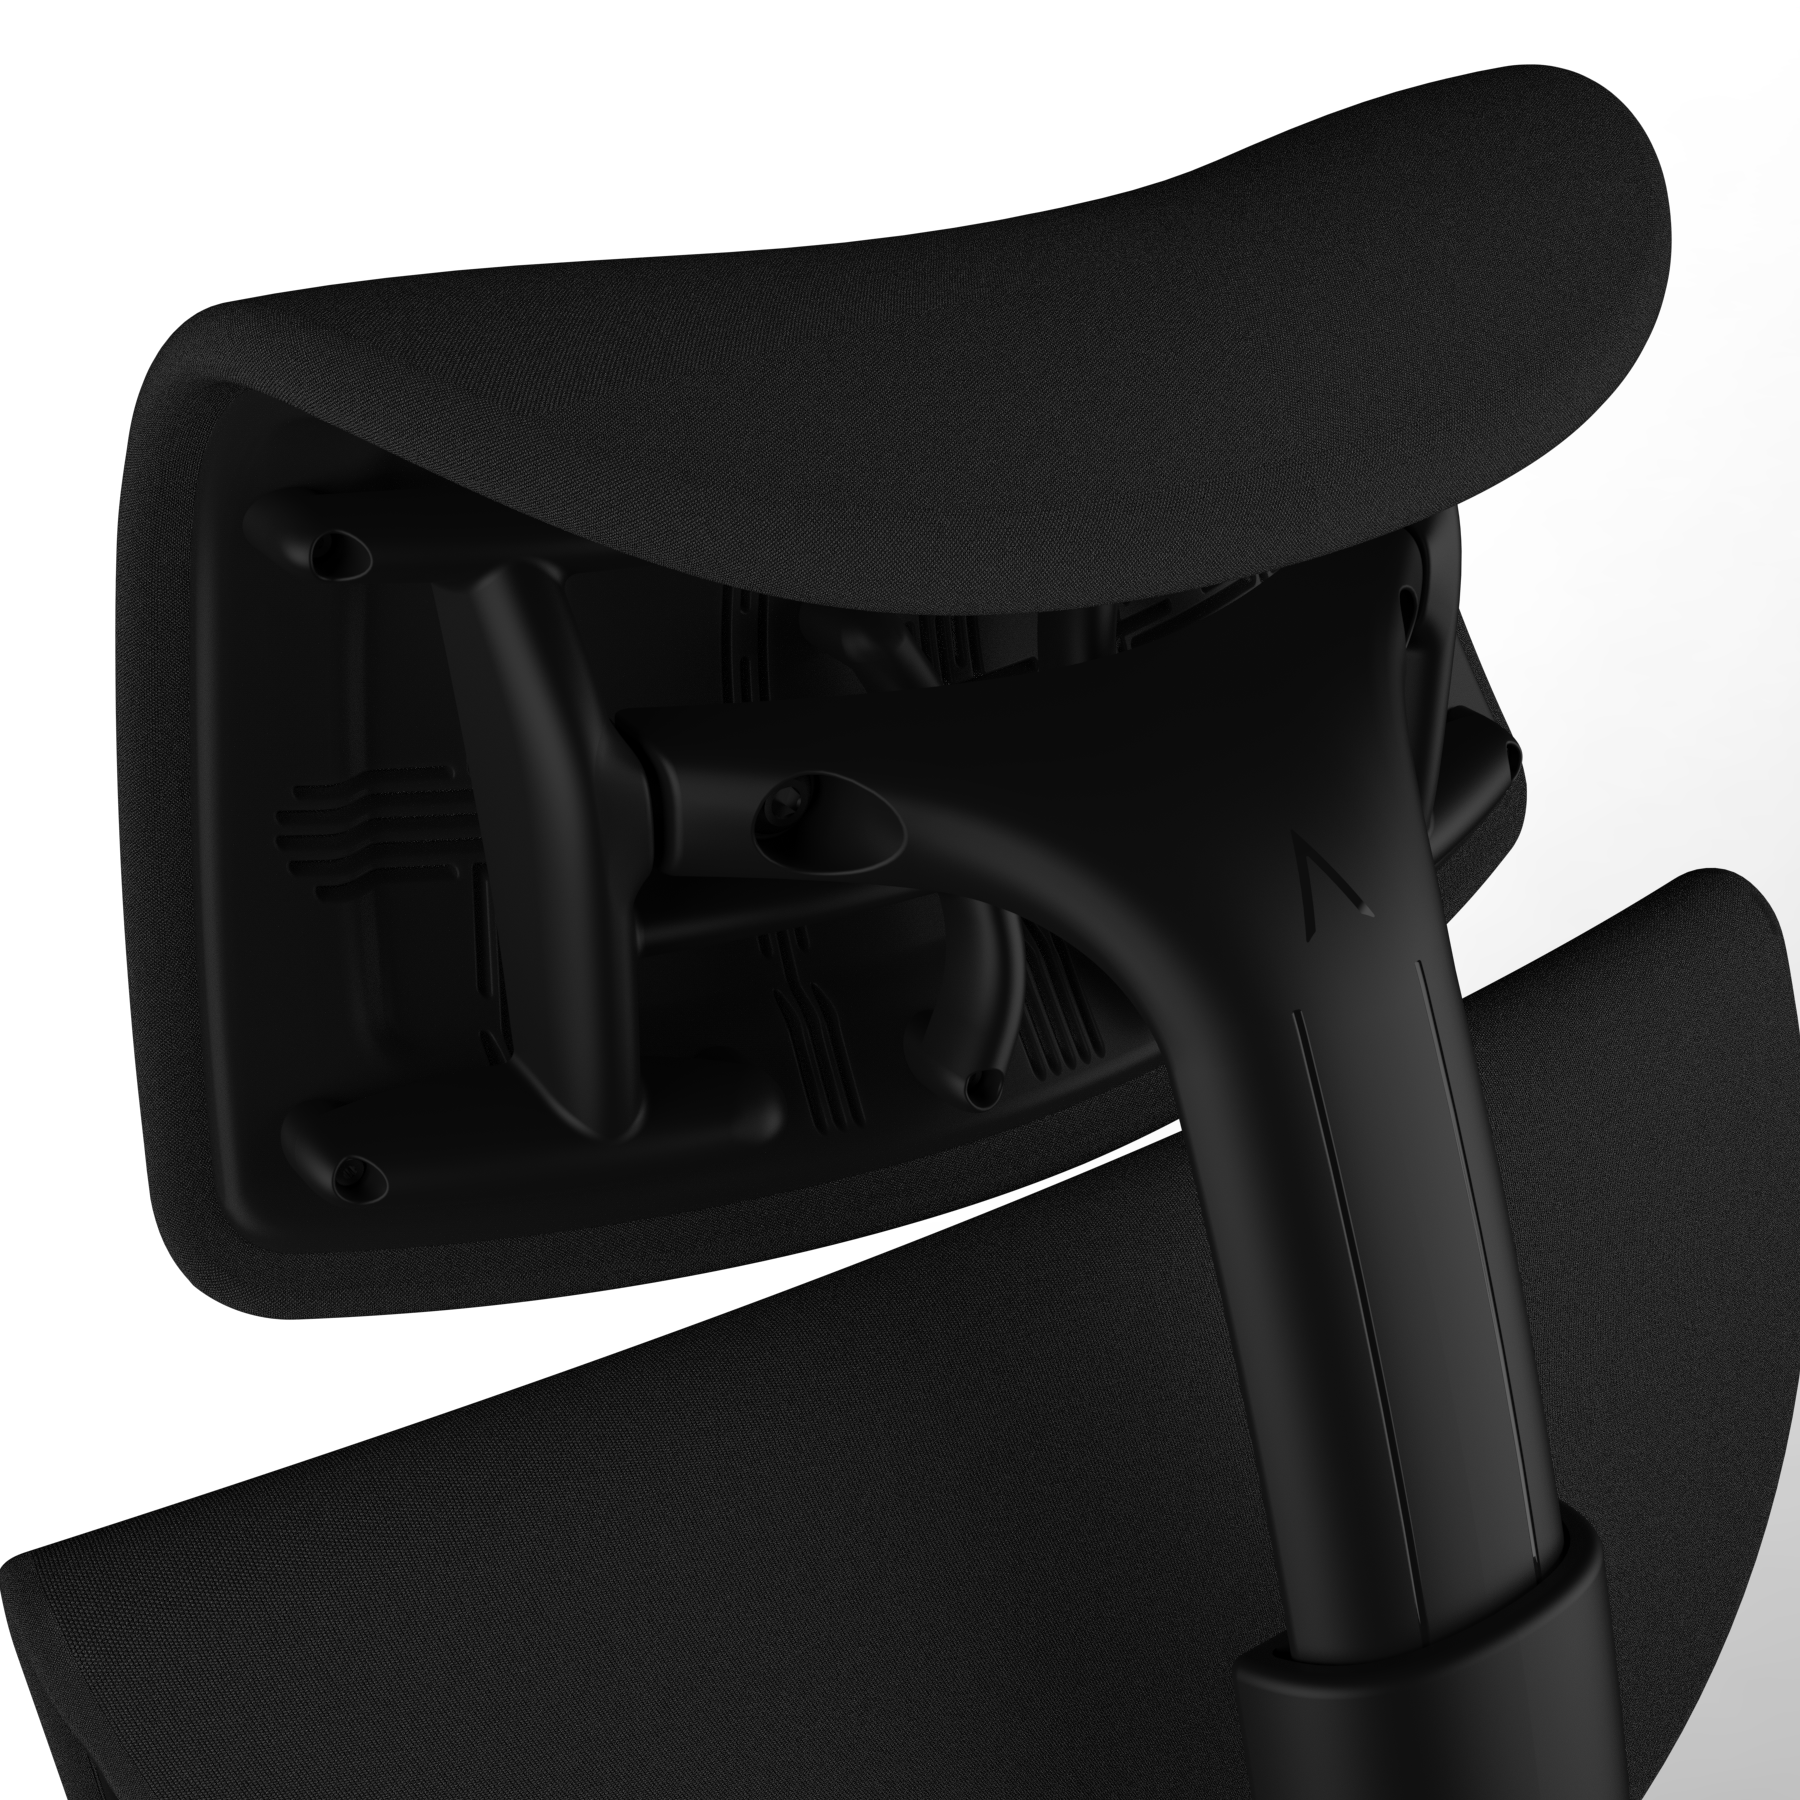 Headrests for Embody chair